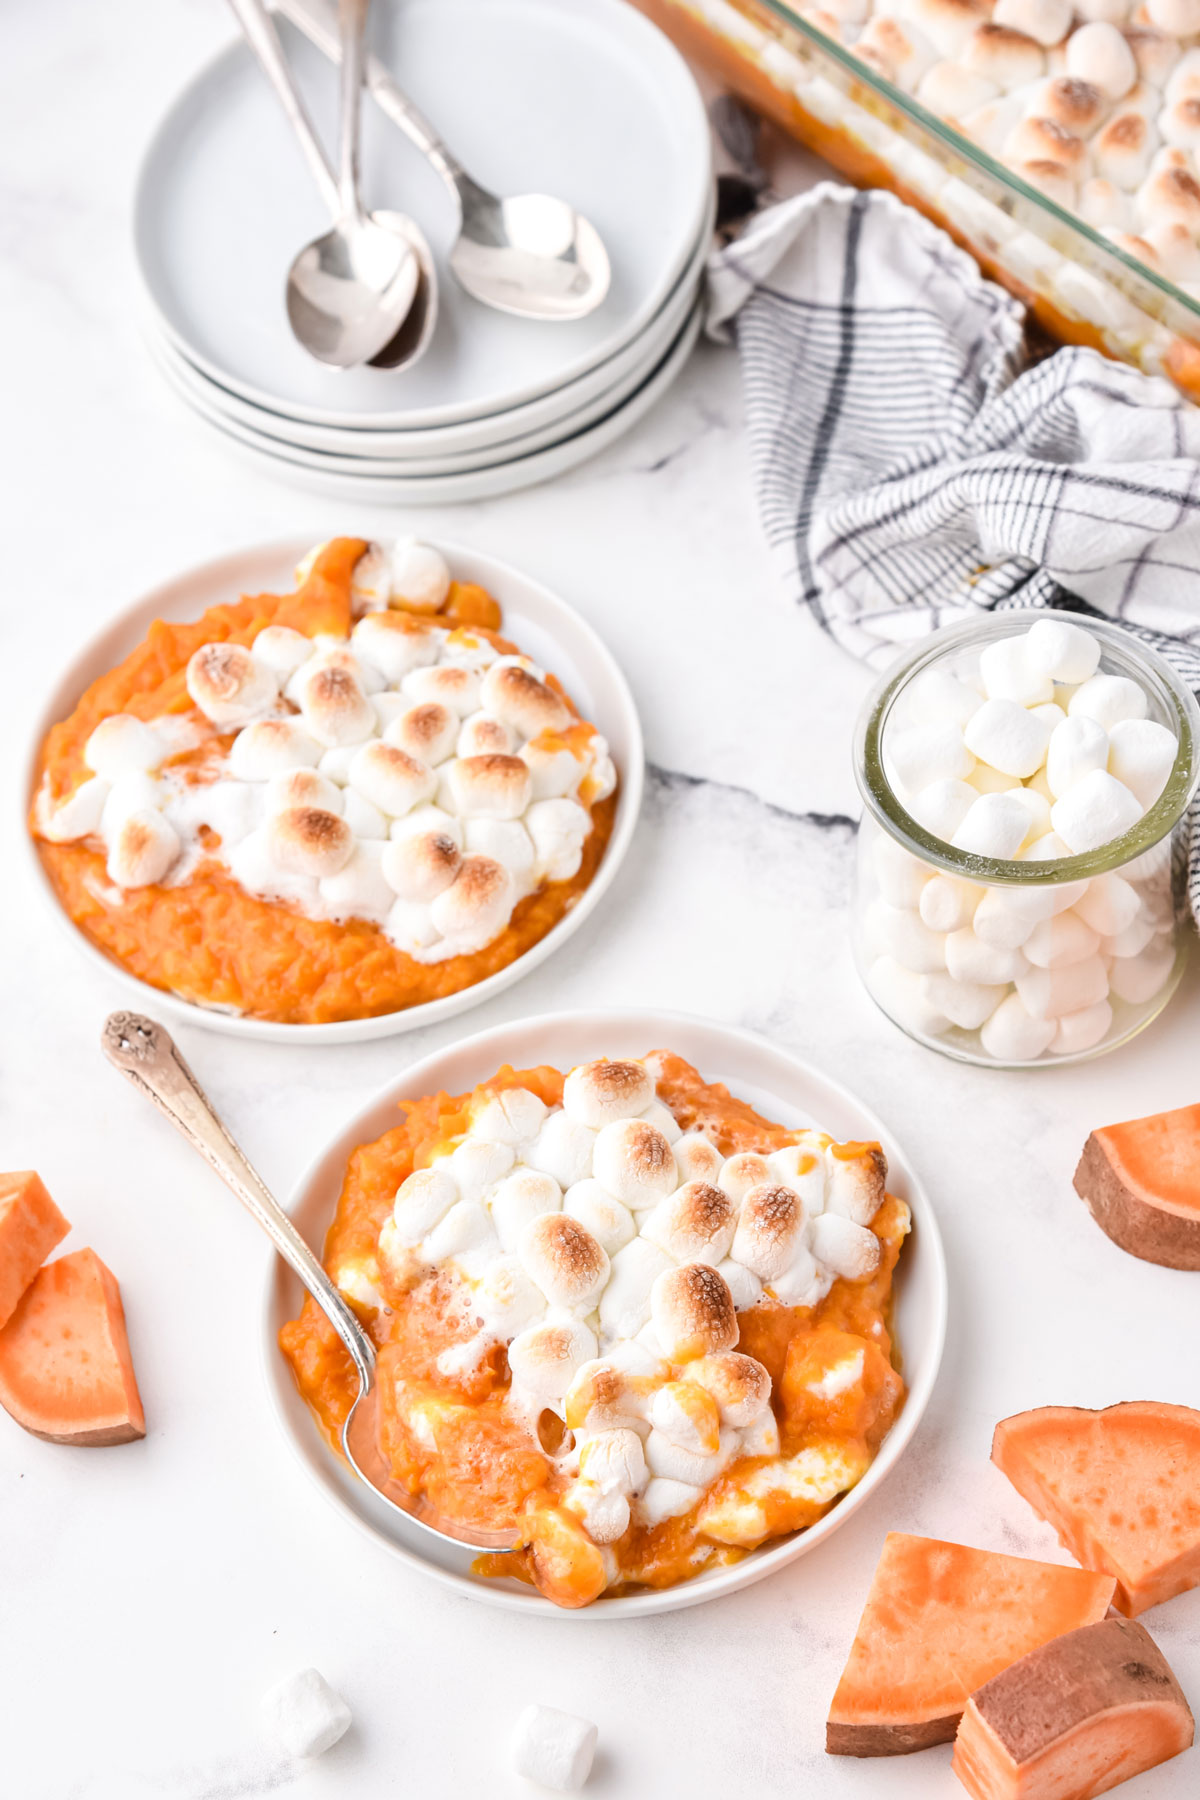 A portion of Sweet Potato Casserole with Marshmallows on a white dessert plate